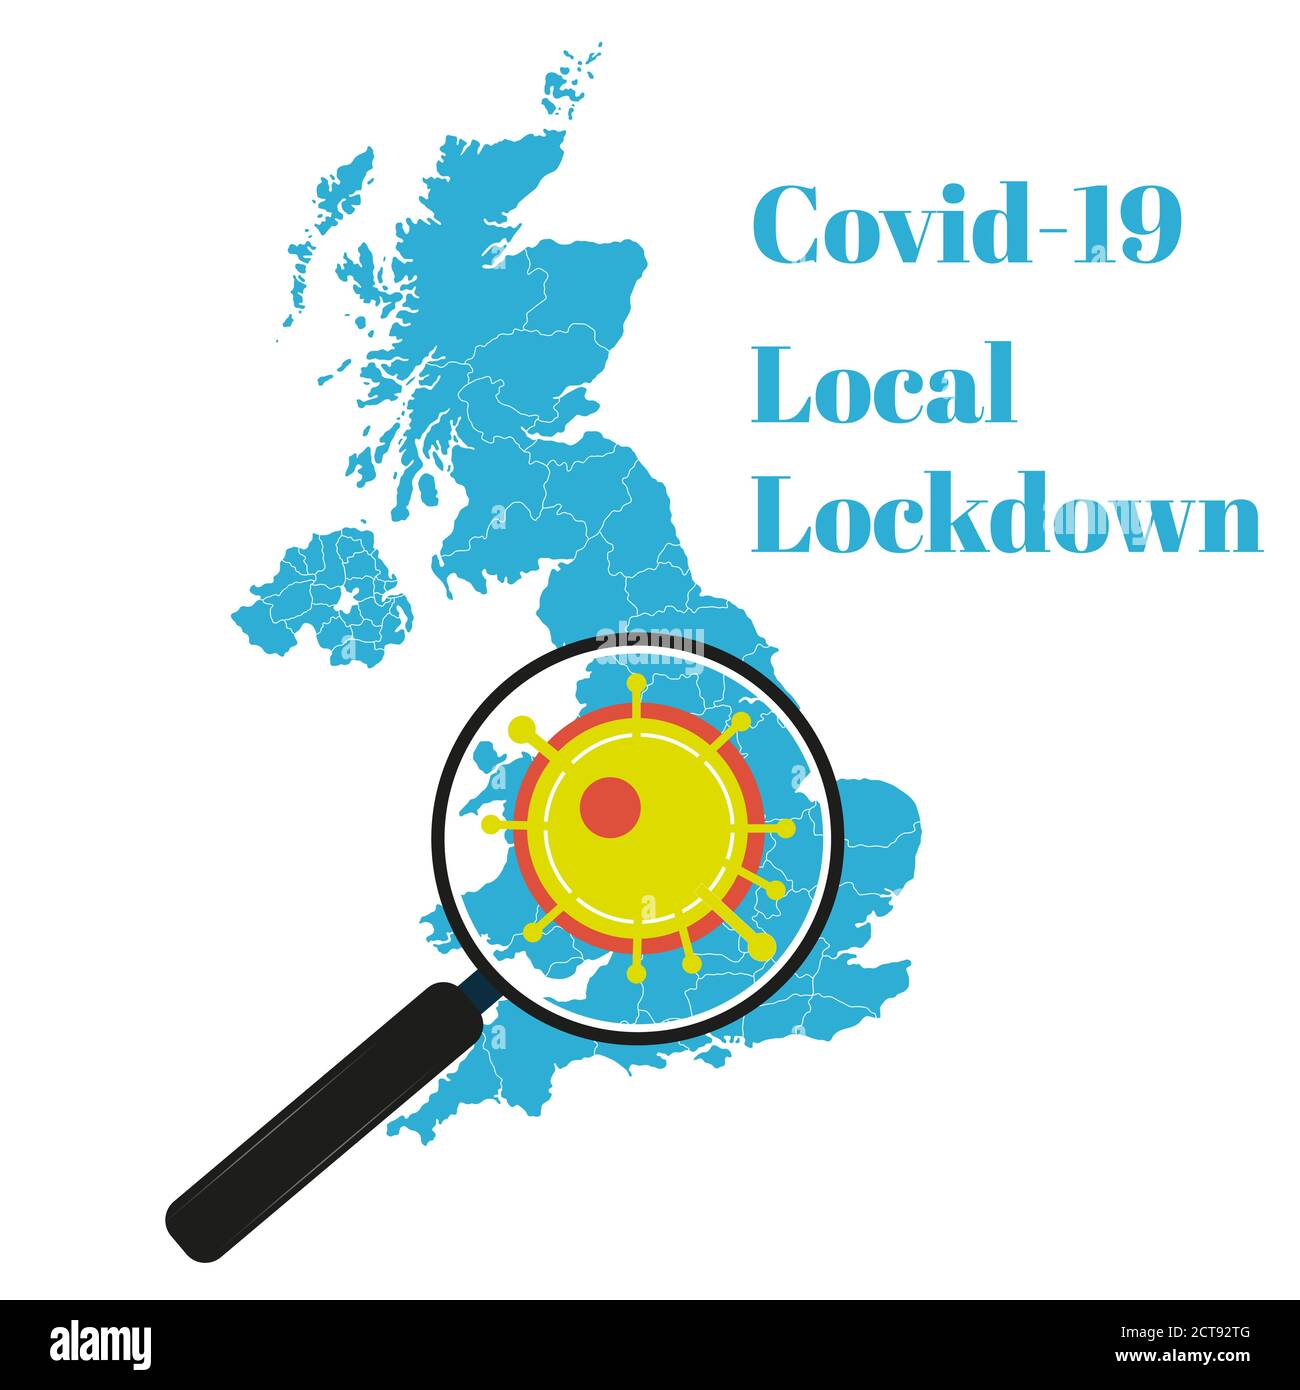 Covid-19 UK local lockdown with map and magnifying glass Stock Vector